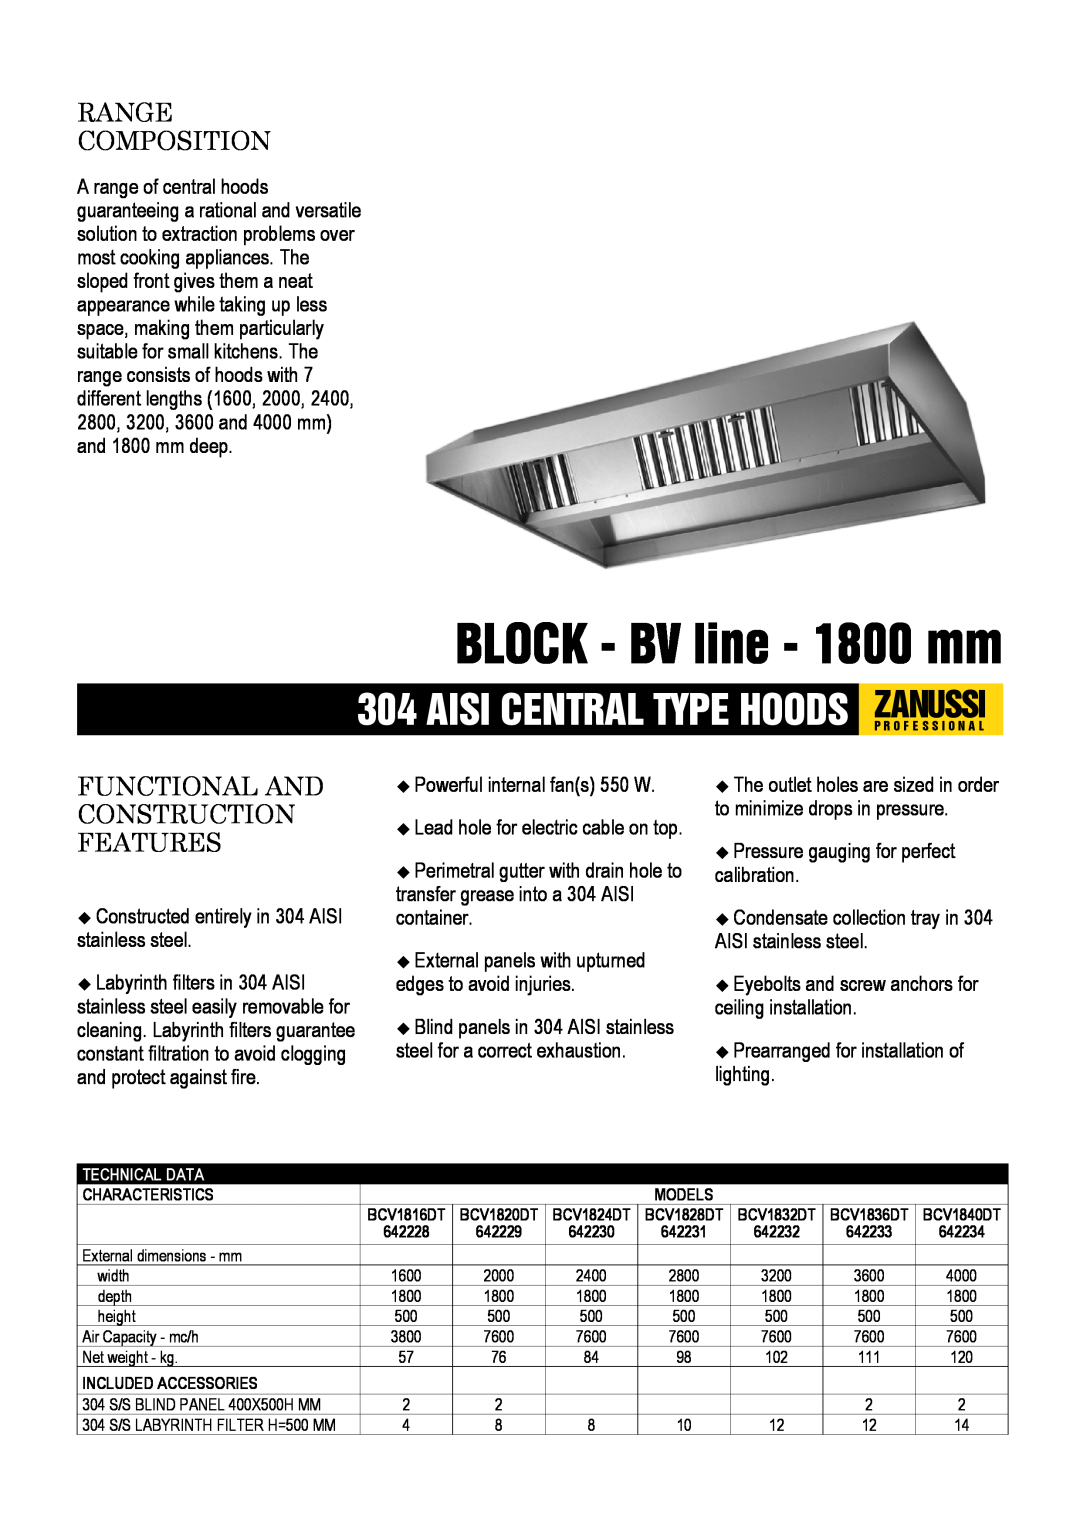 Zanussi 642232, 642230 dimensions BLOCK - BV line - 1800 mm, Range Composition, Functional And Construction Features 